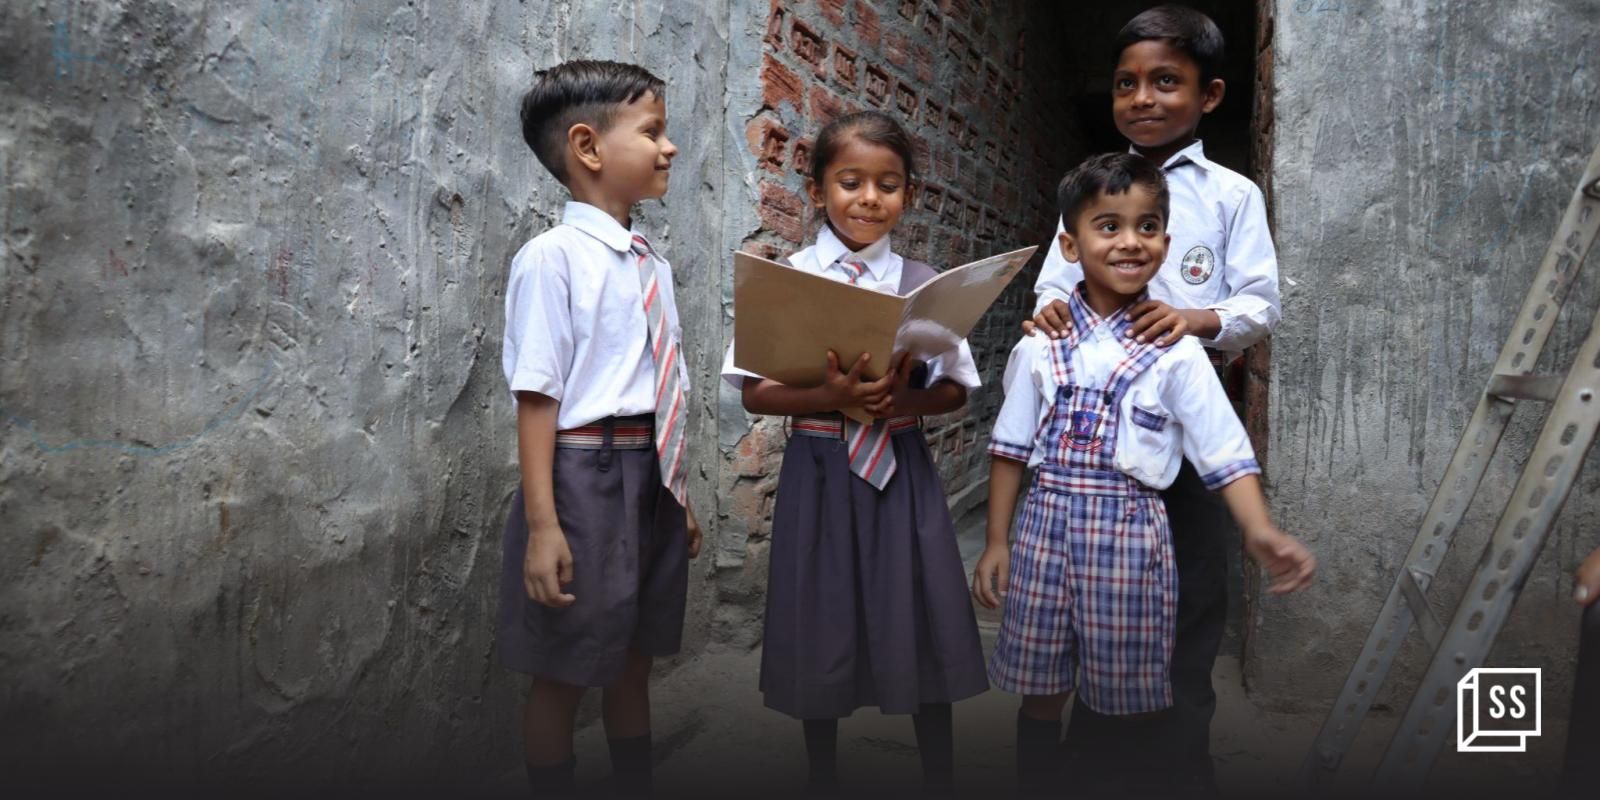 RightWalk Foundation strives to make education accessible to all children in UP